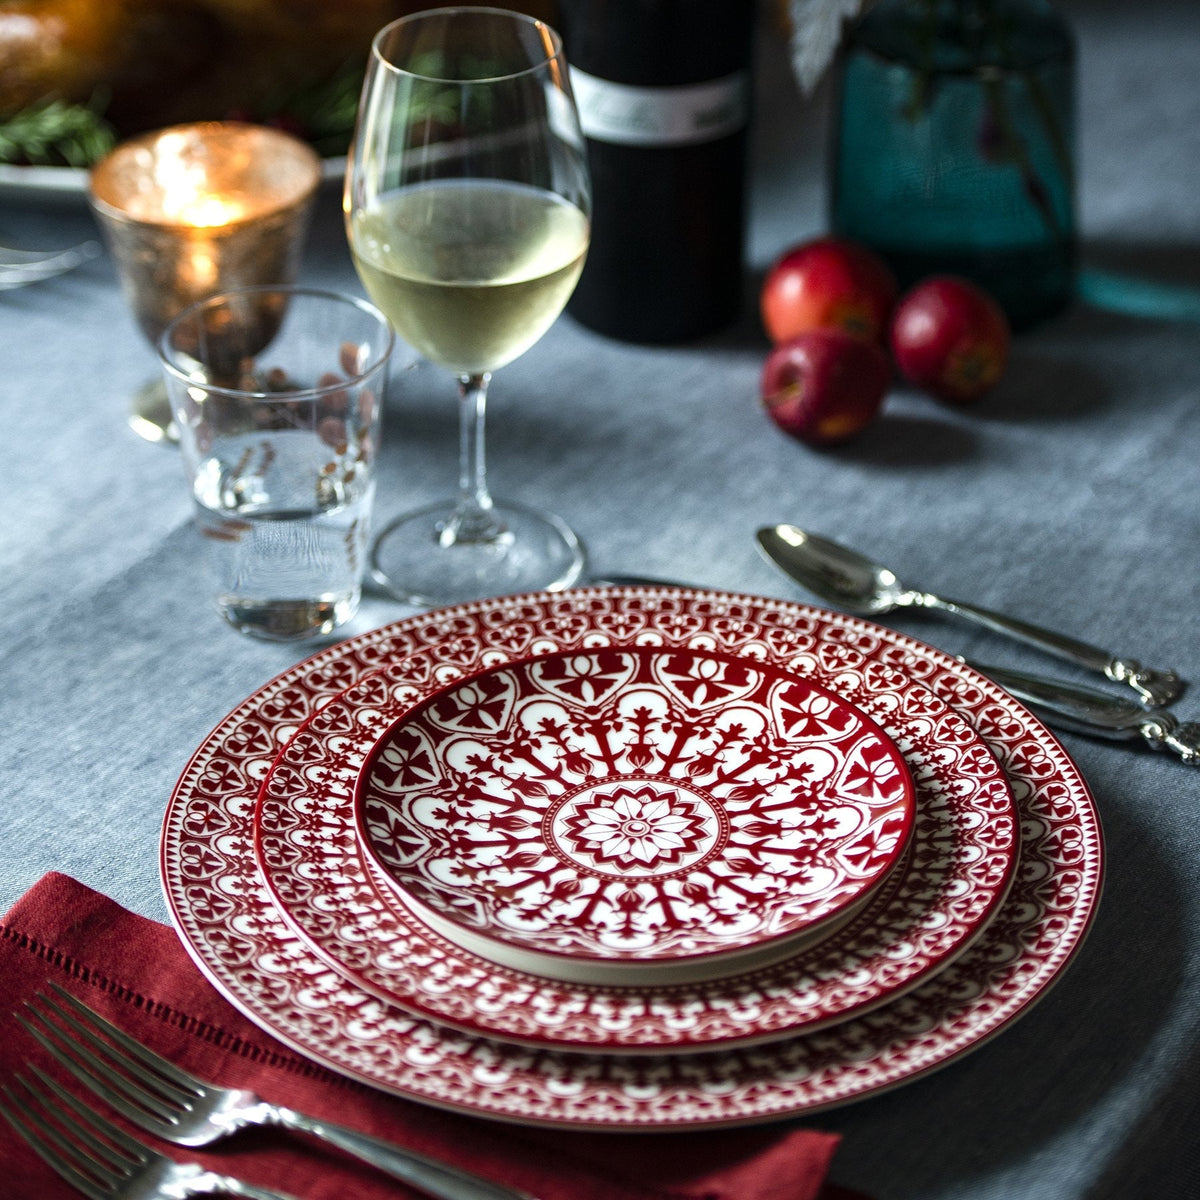 A dining table set with heirloom-quality Caskata Artisanal Home Casablanca Crimson Small Plates, featuring red and white patterned plates, a glass of white wine, a water glass, cutlery, a red napkin, and a candle in the background.